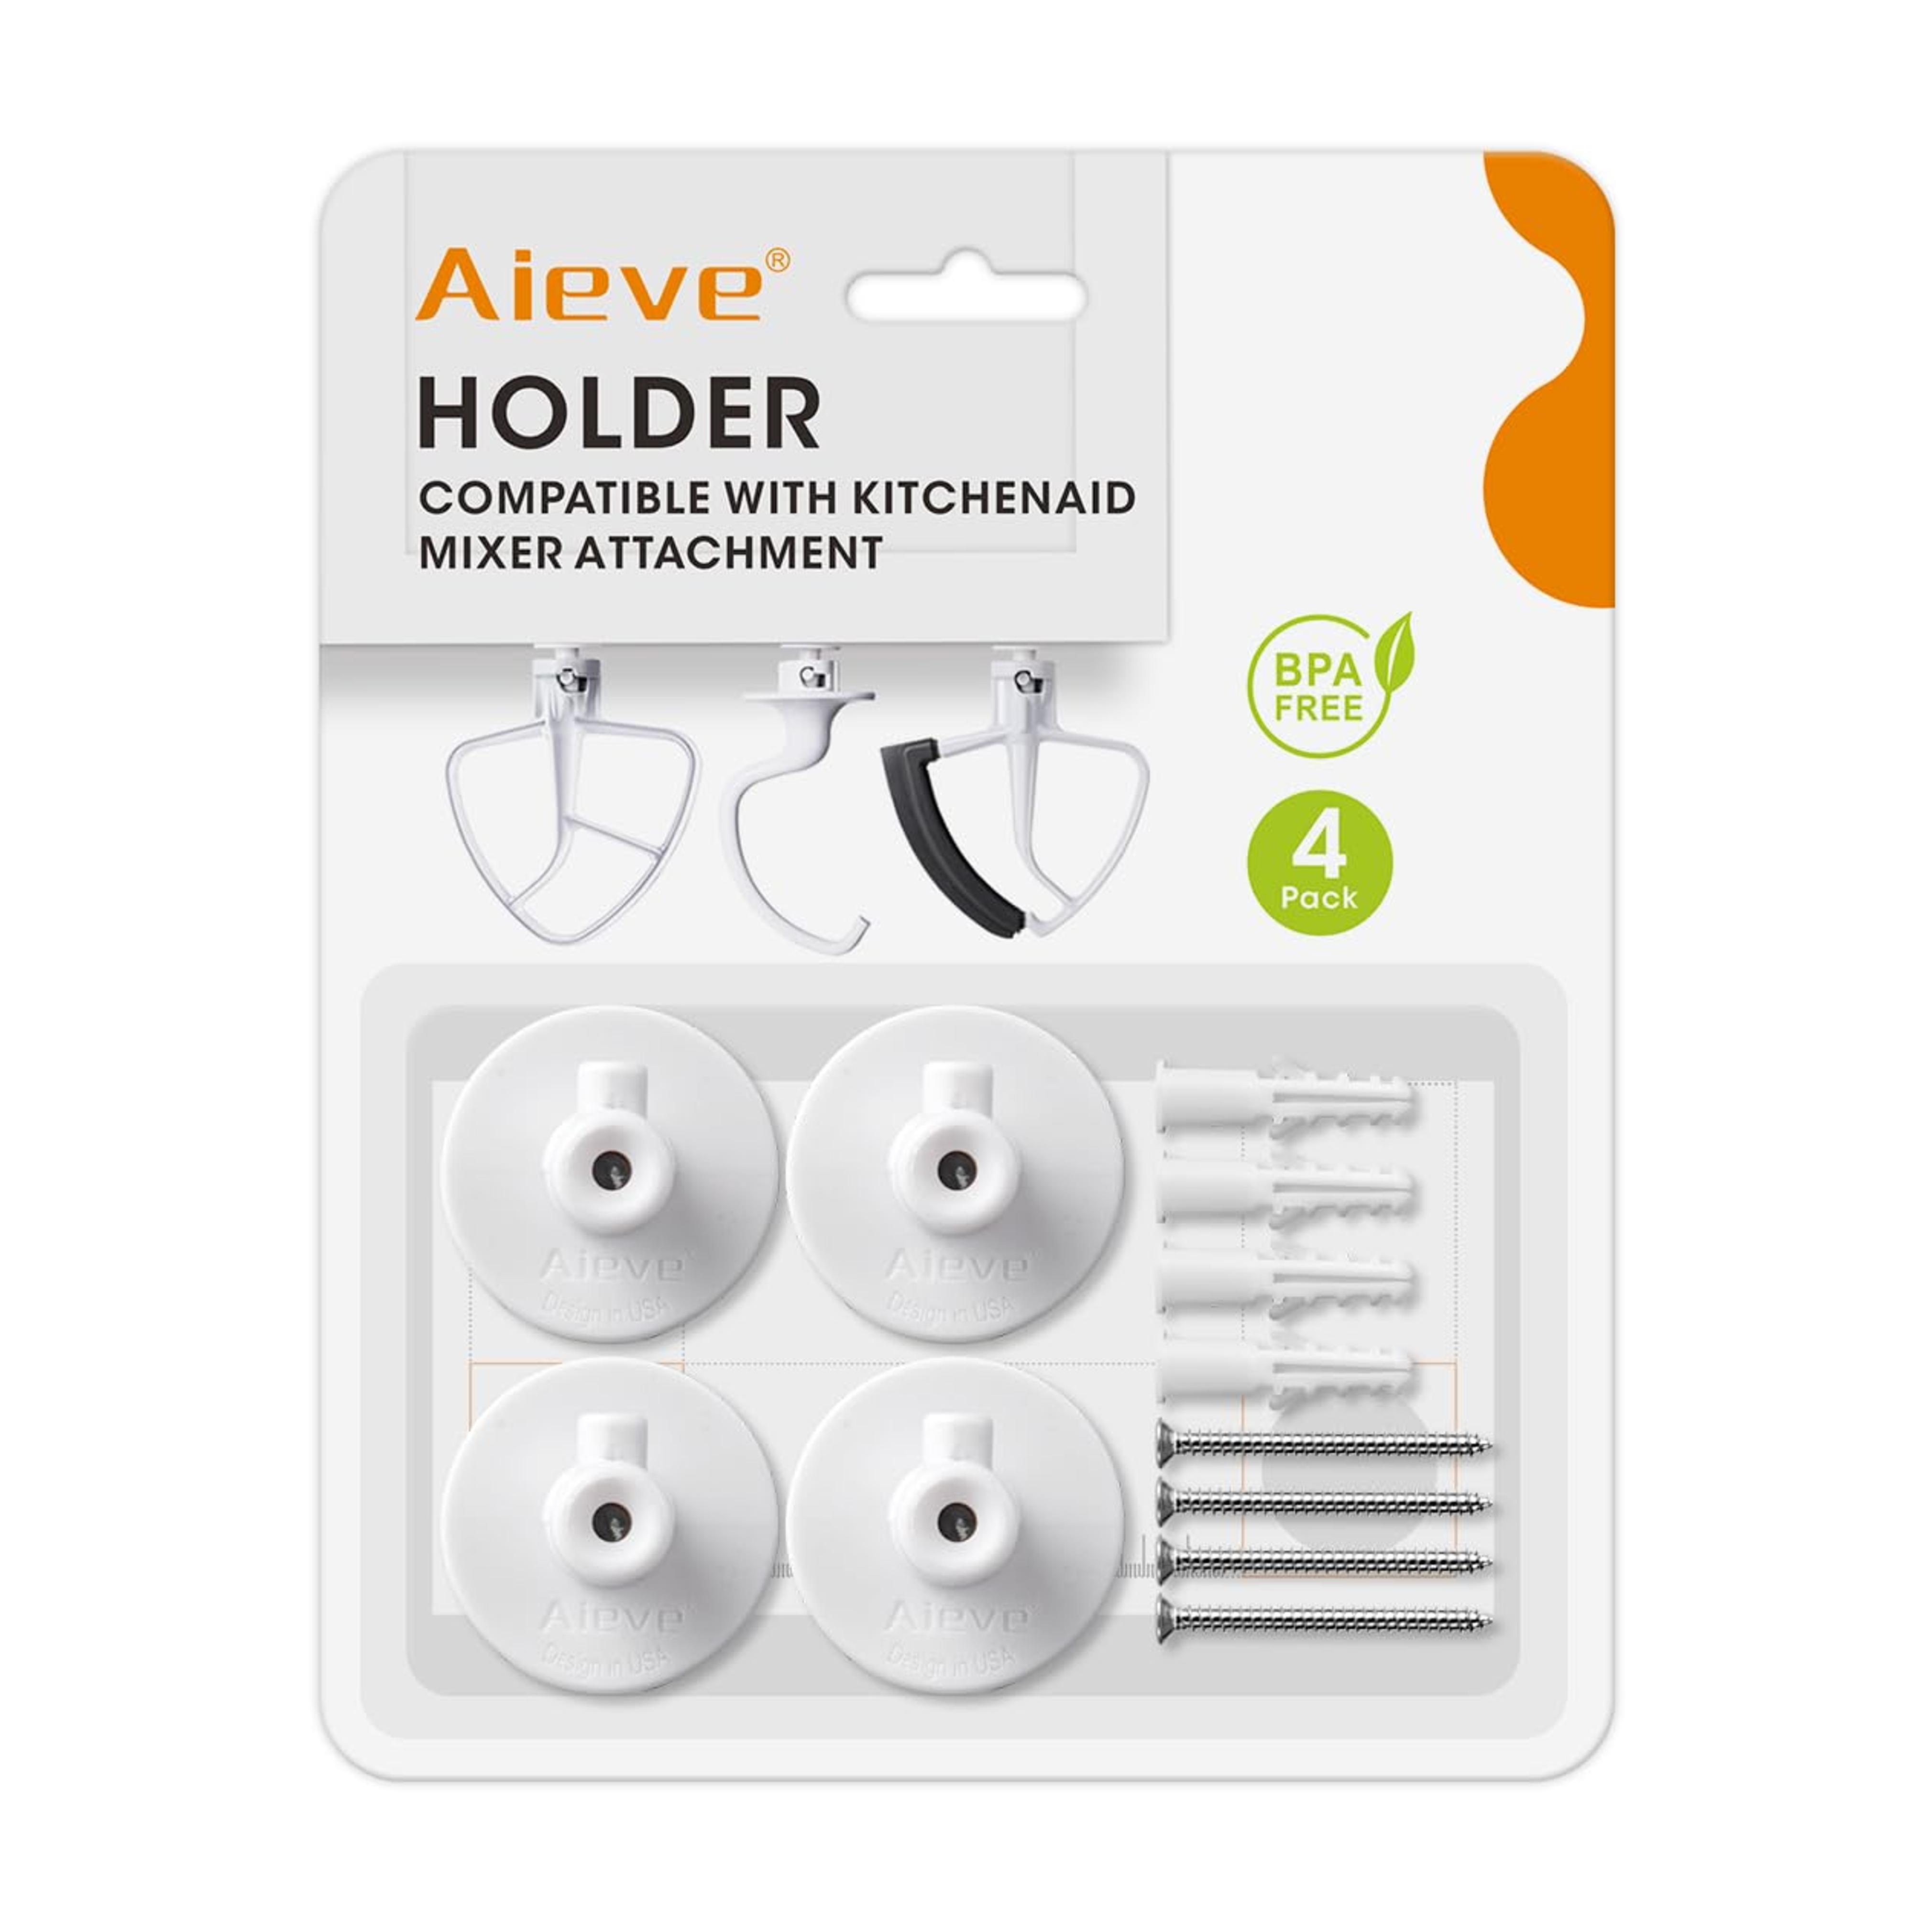 Aieve Stand Mixer Attachment Holders Compatible with Kitchenaid Mixer Accessories(4 Pack)